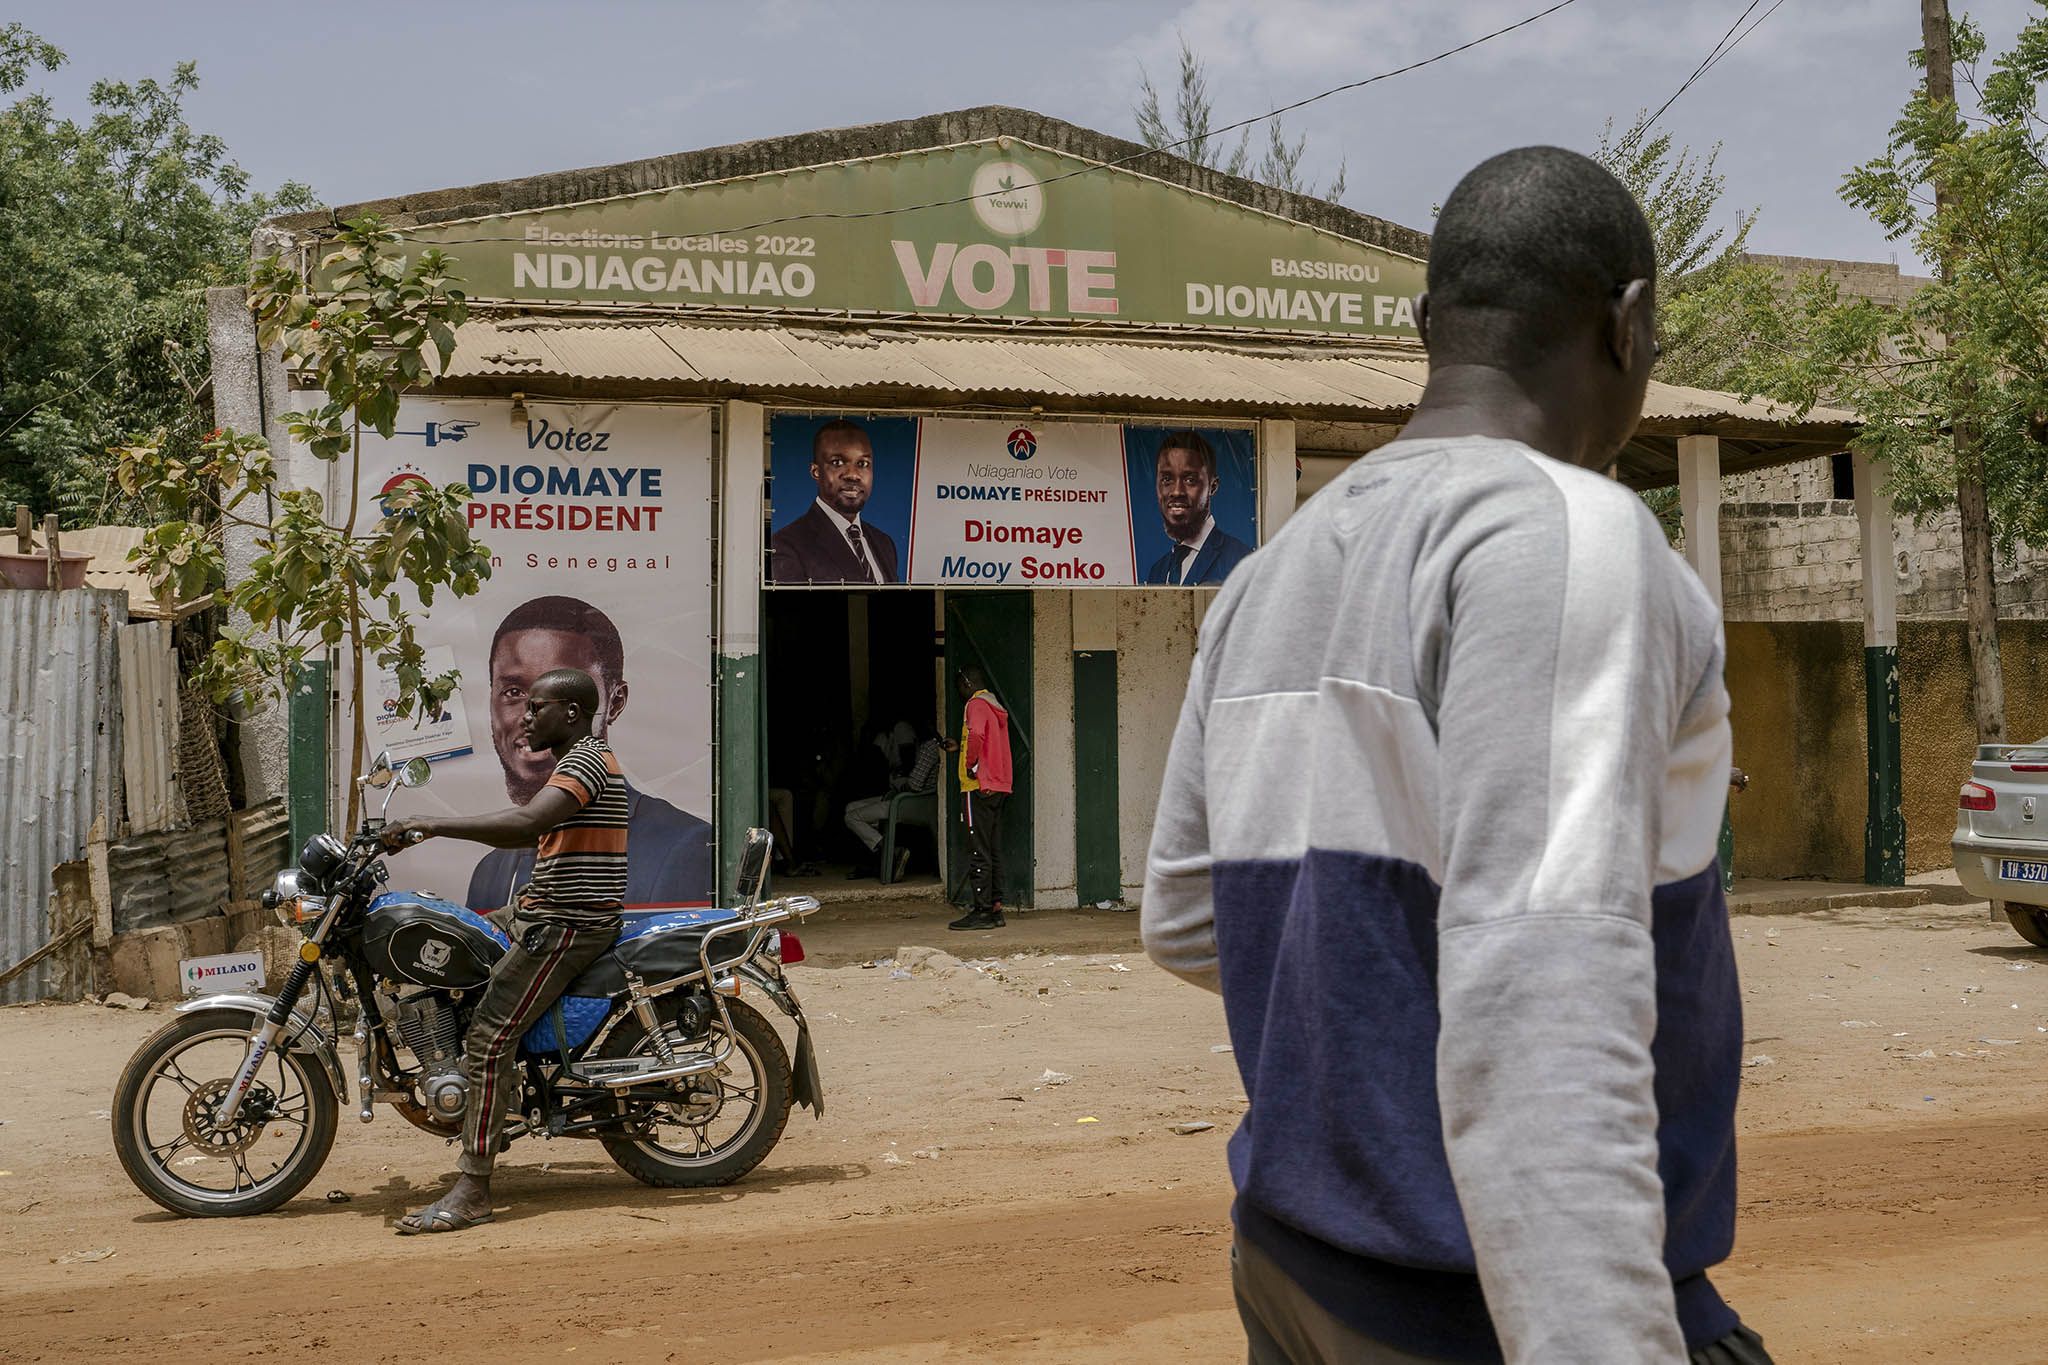 Men pass a campaign office of Senegal’s newly elected president, Bassirou Diomaye Faye, in his family village. Faye’s election ends a Senegalese political crisis and can let the country consolidate its democracy. (Carmen Abd Ali/The New York Times)